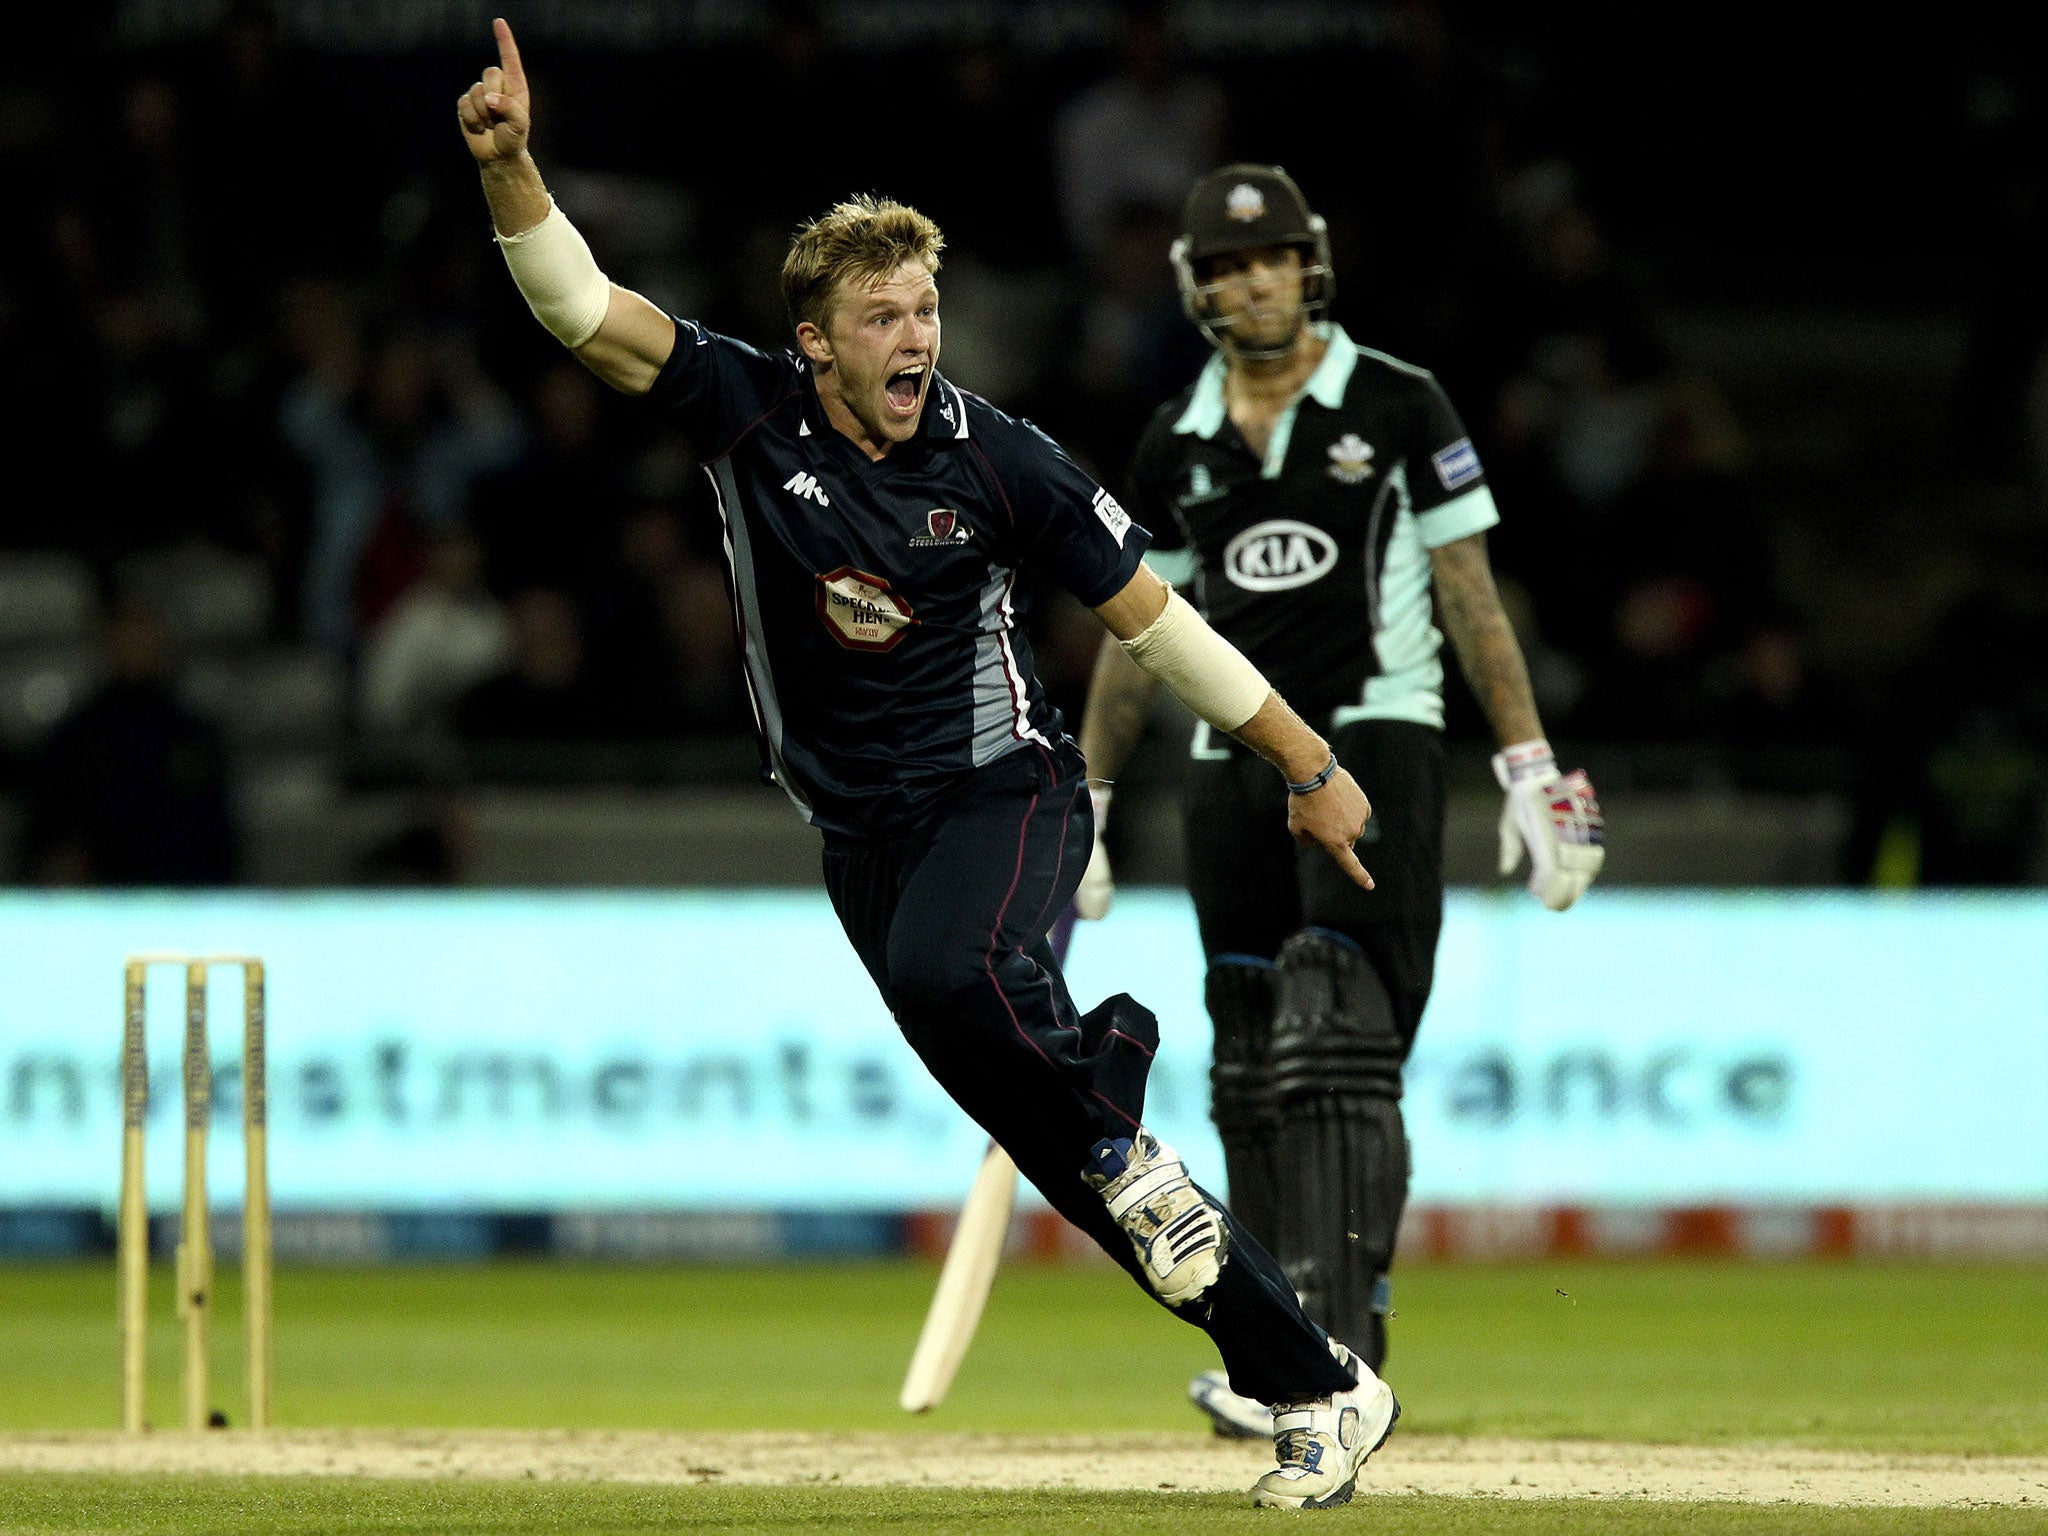 David Willey produced a remarkable individual performance